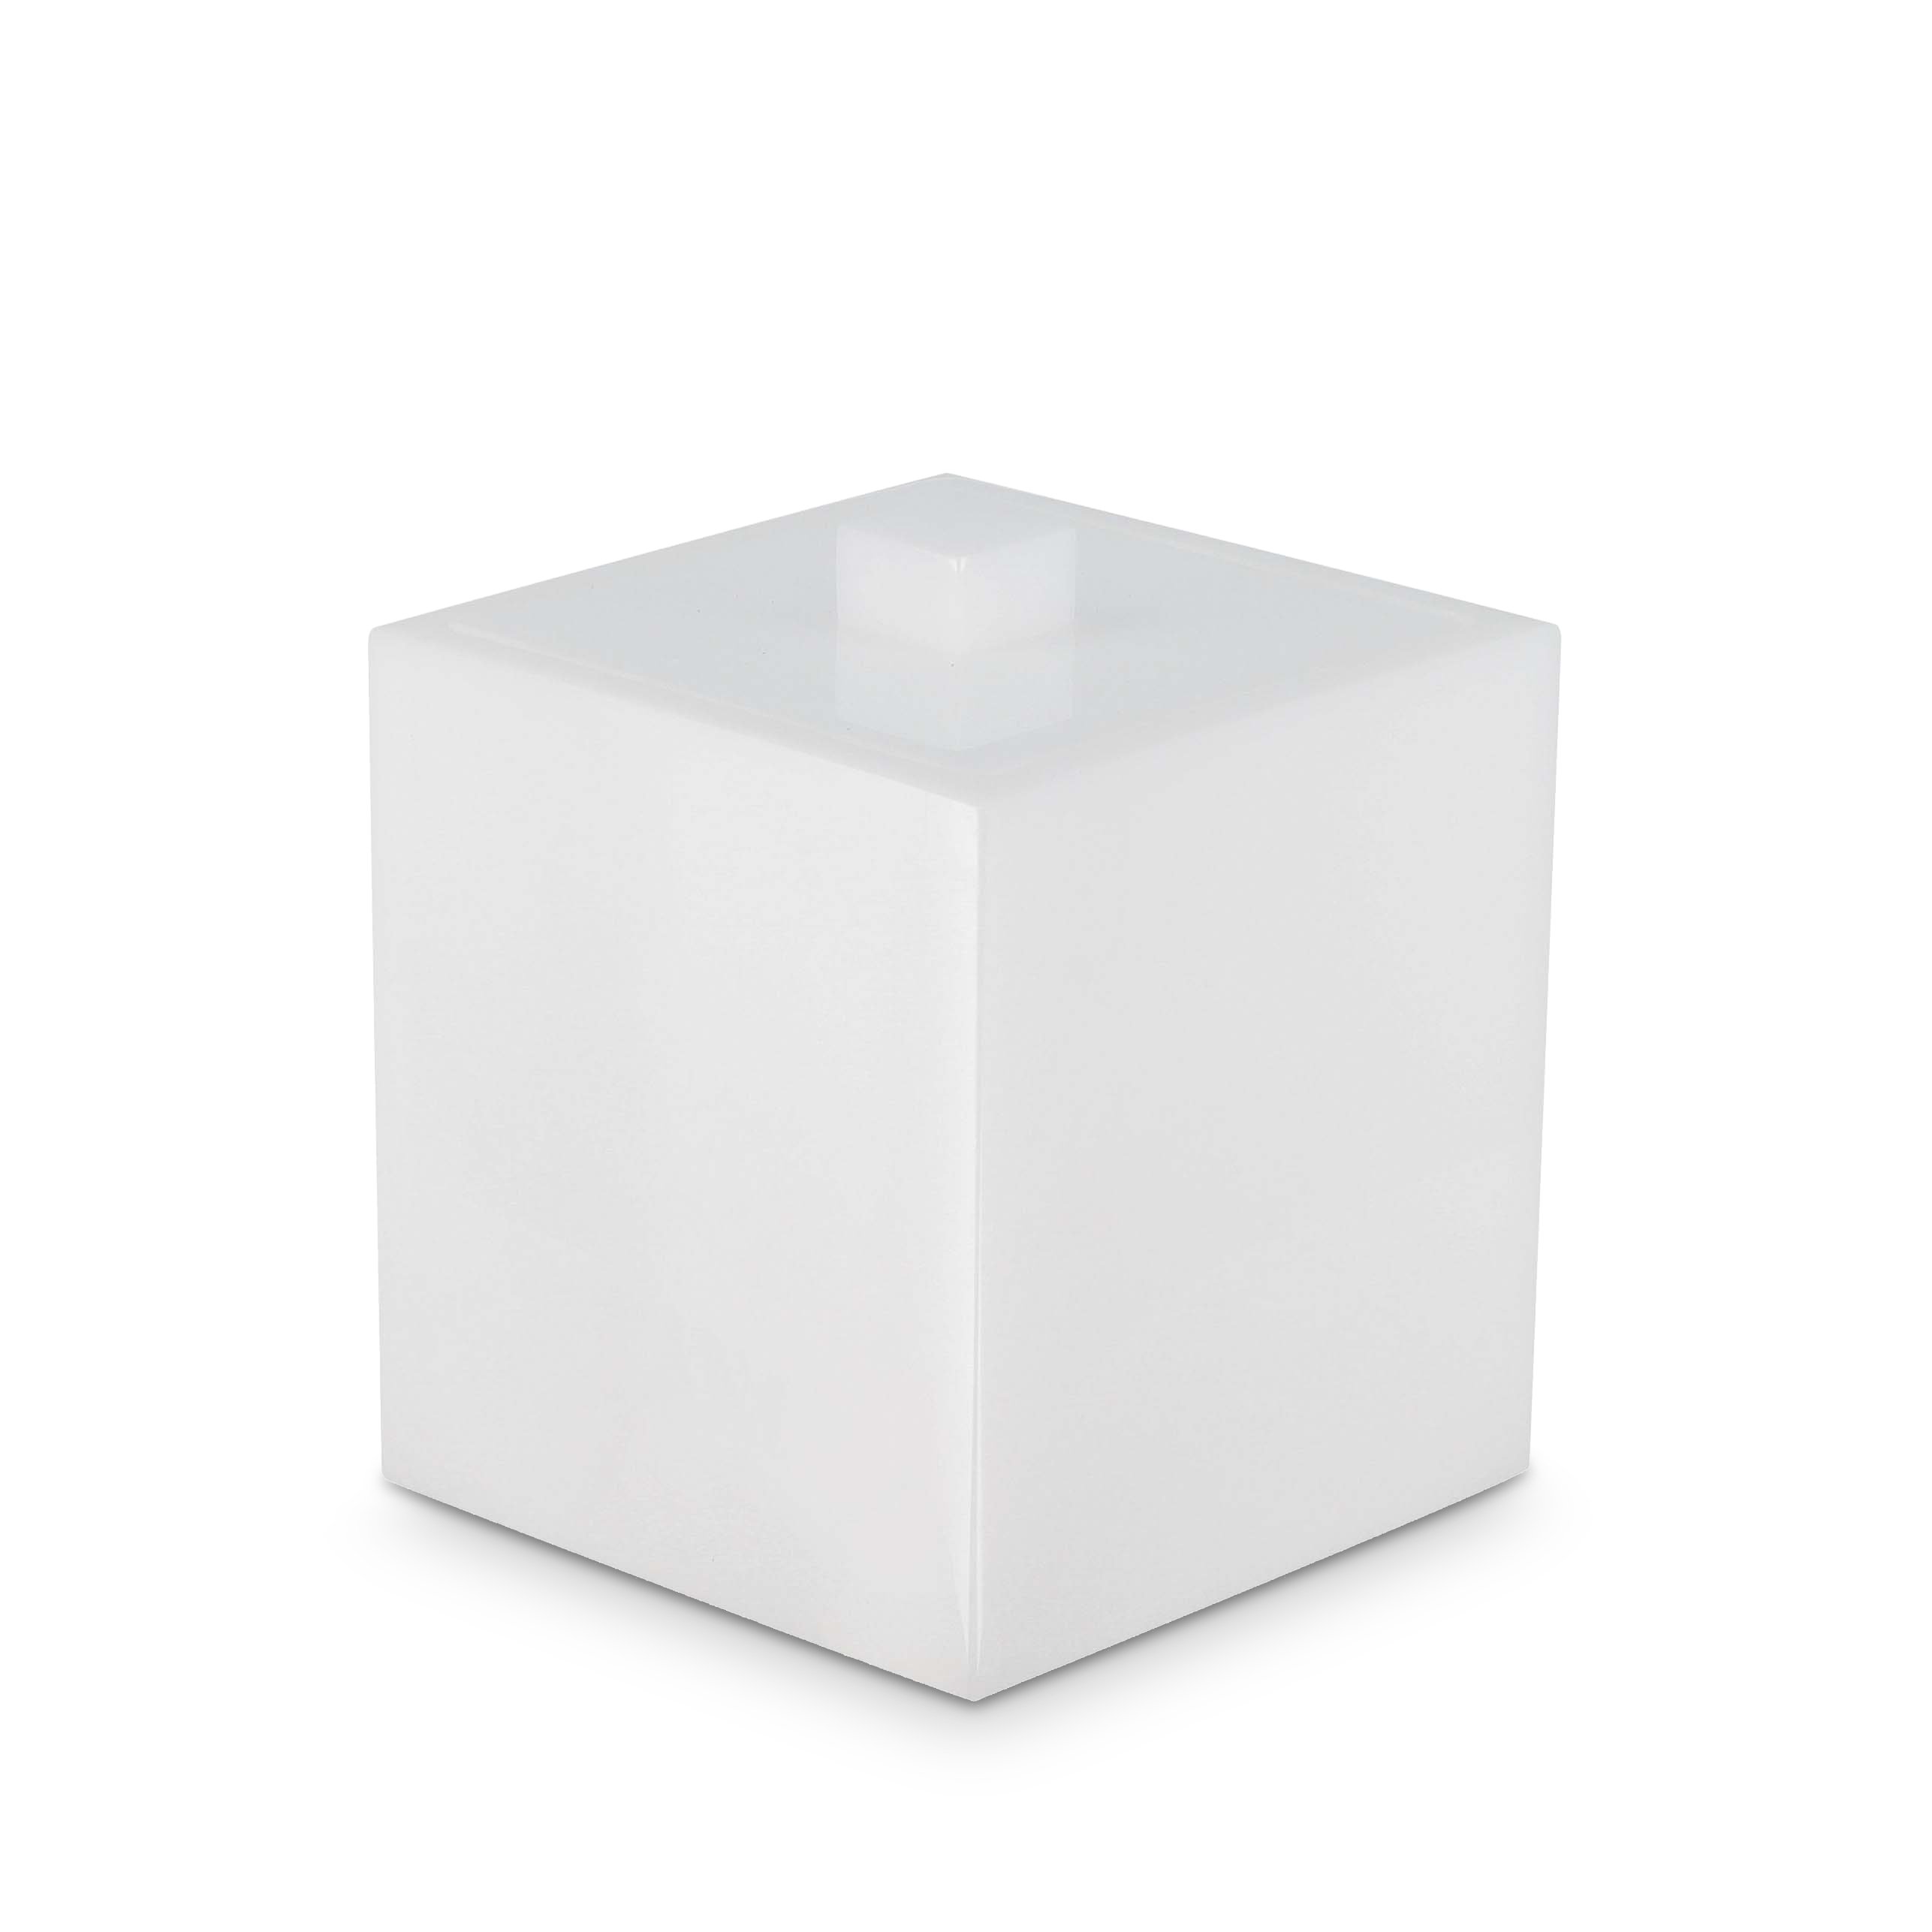 Mike + Ally - Ice White Container - 31633 - White - 